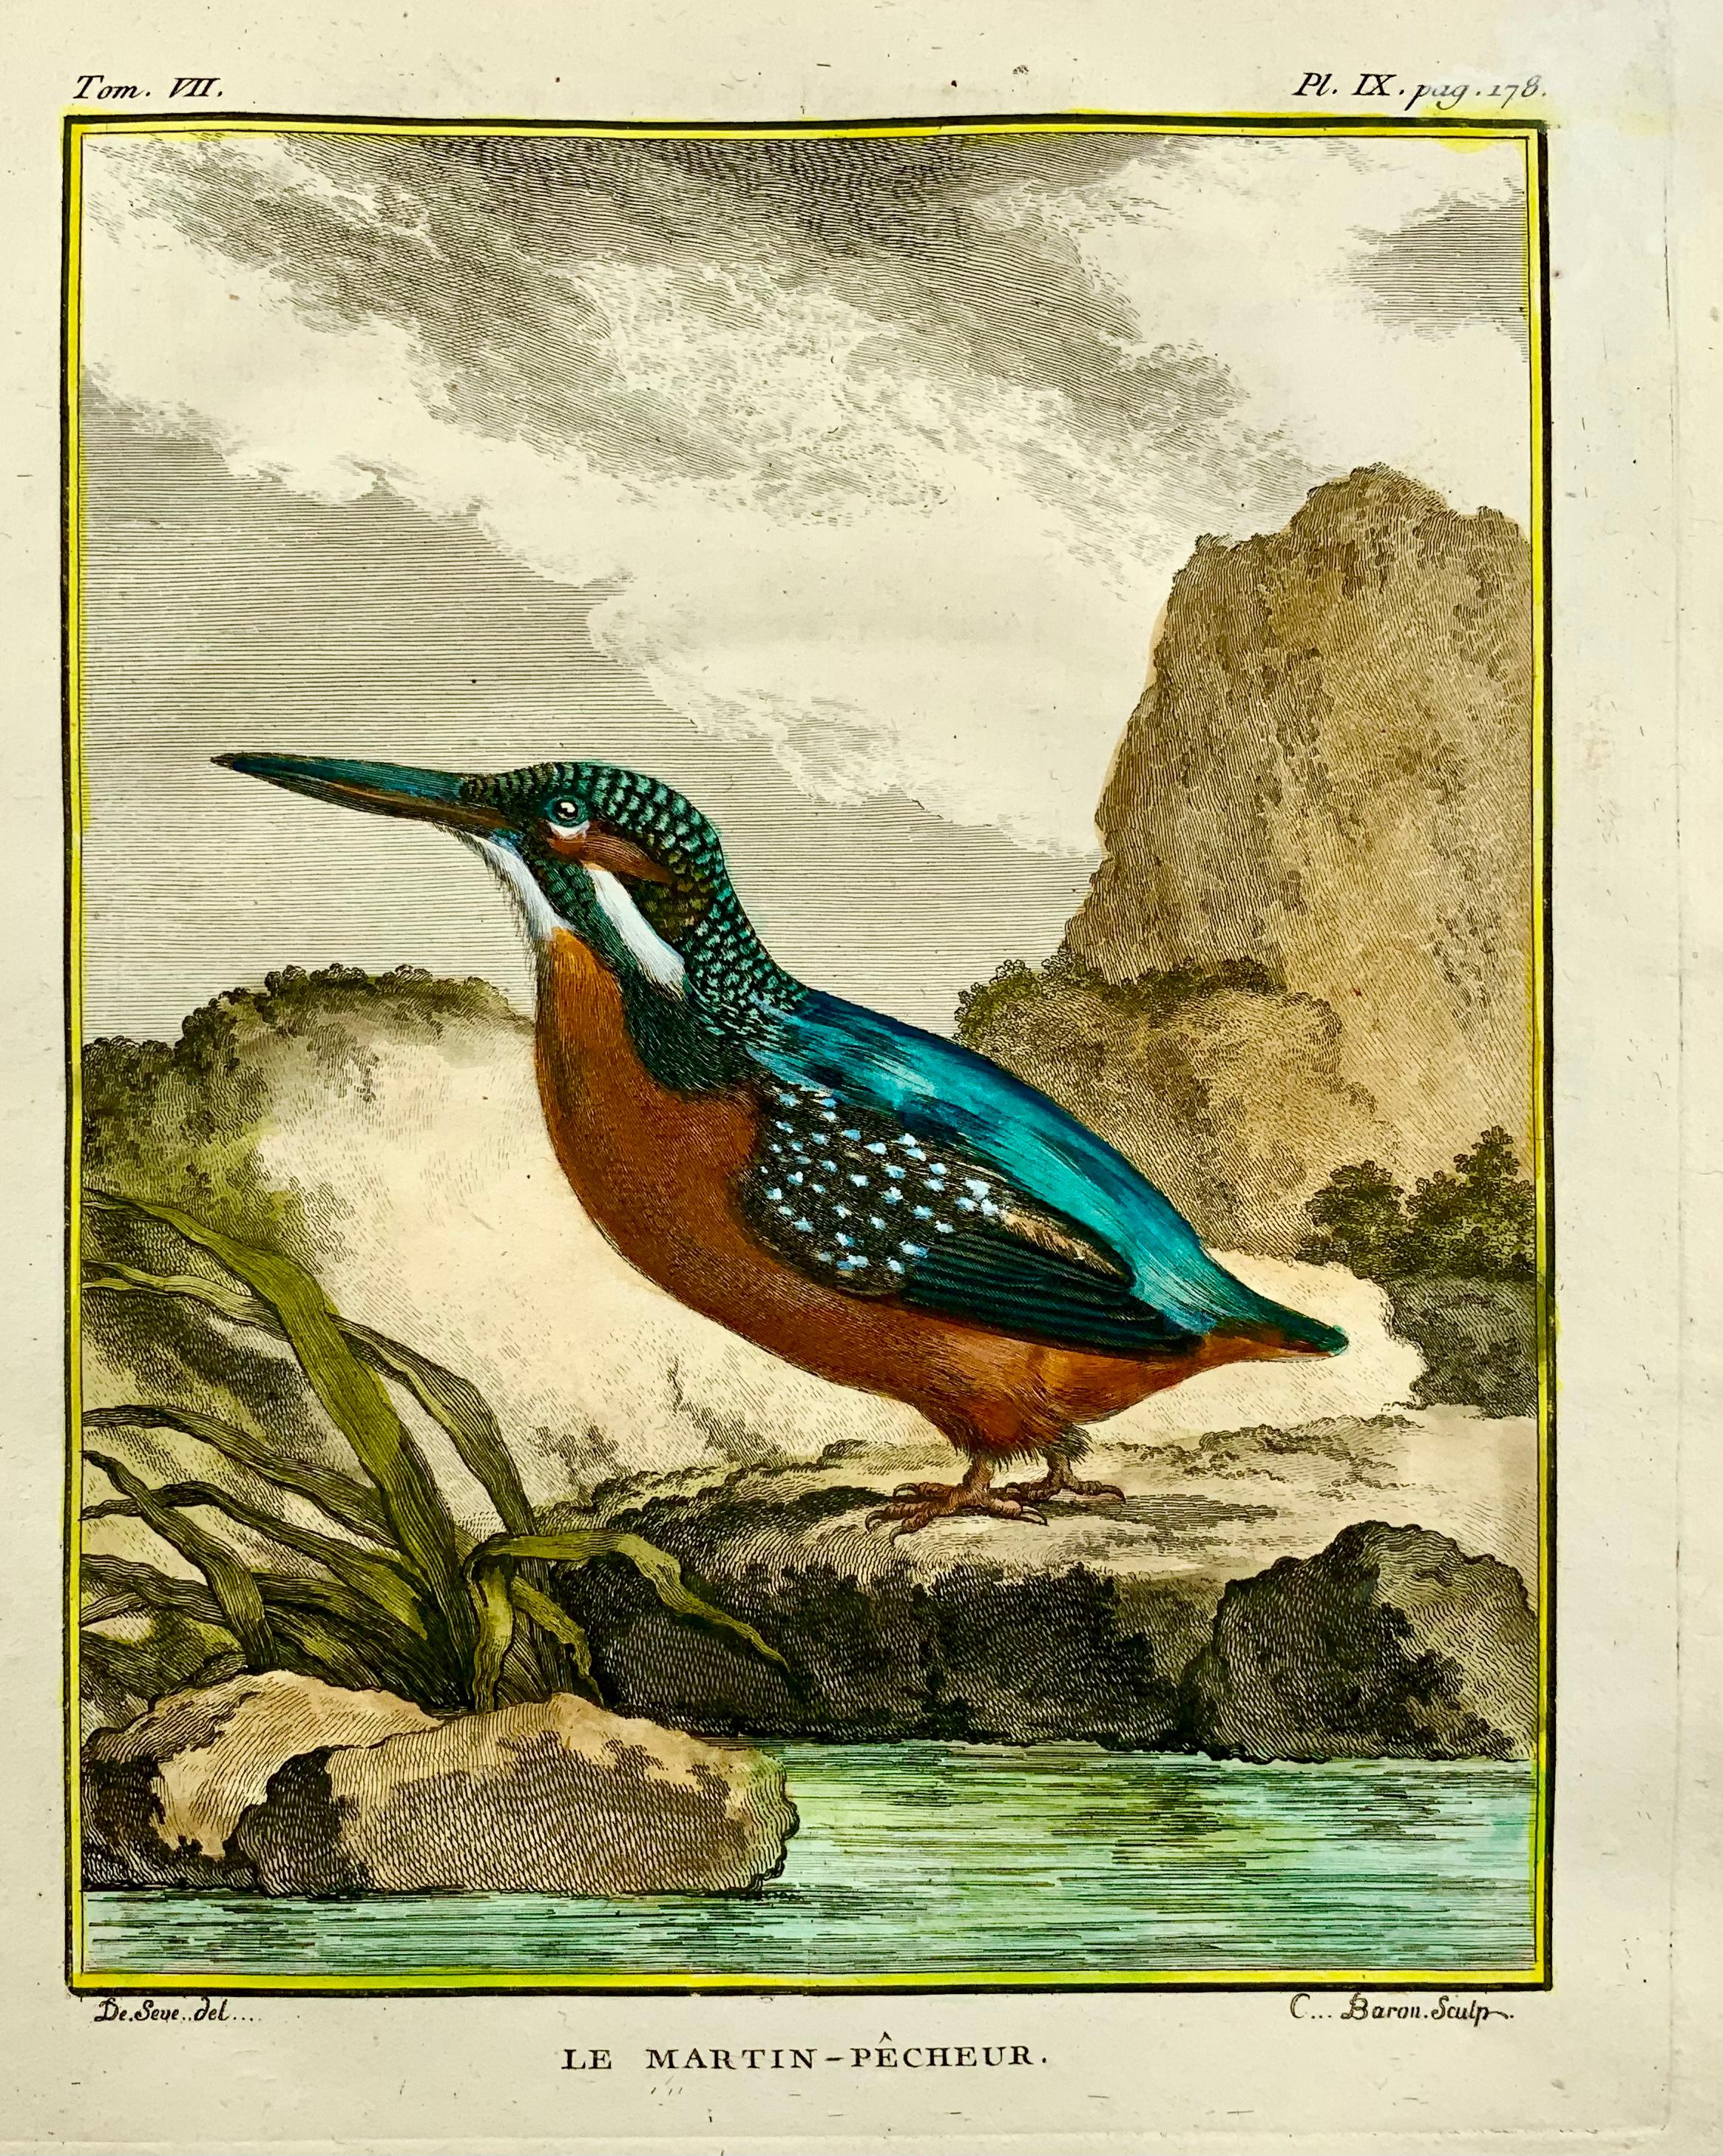 Engraving on hand laid (verge) paper. 

Issued for the famed First Edition in quarto of the “Histoire naturelle des oiseaux.”, by Georges-Louis Leclerc, Comte de Buffon, ed. published in Paris ca 1775. 

Made by ‘Baron’ after ‘Jacques de